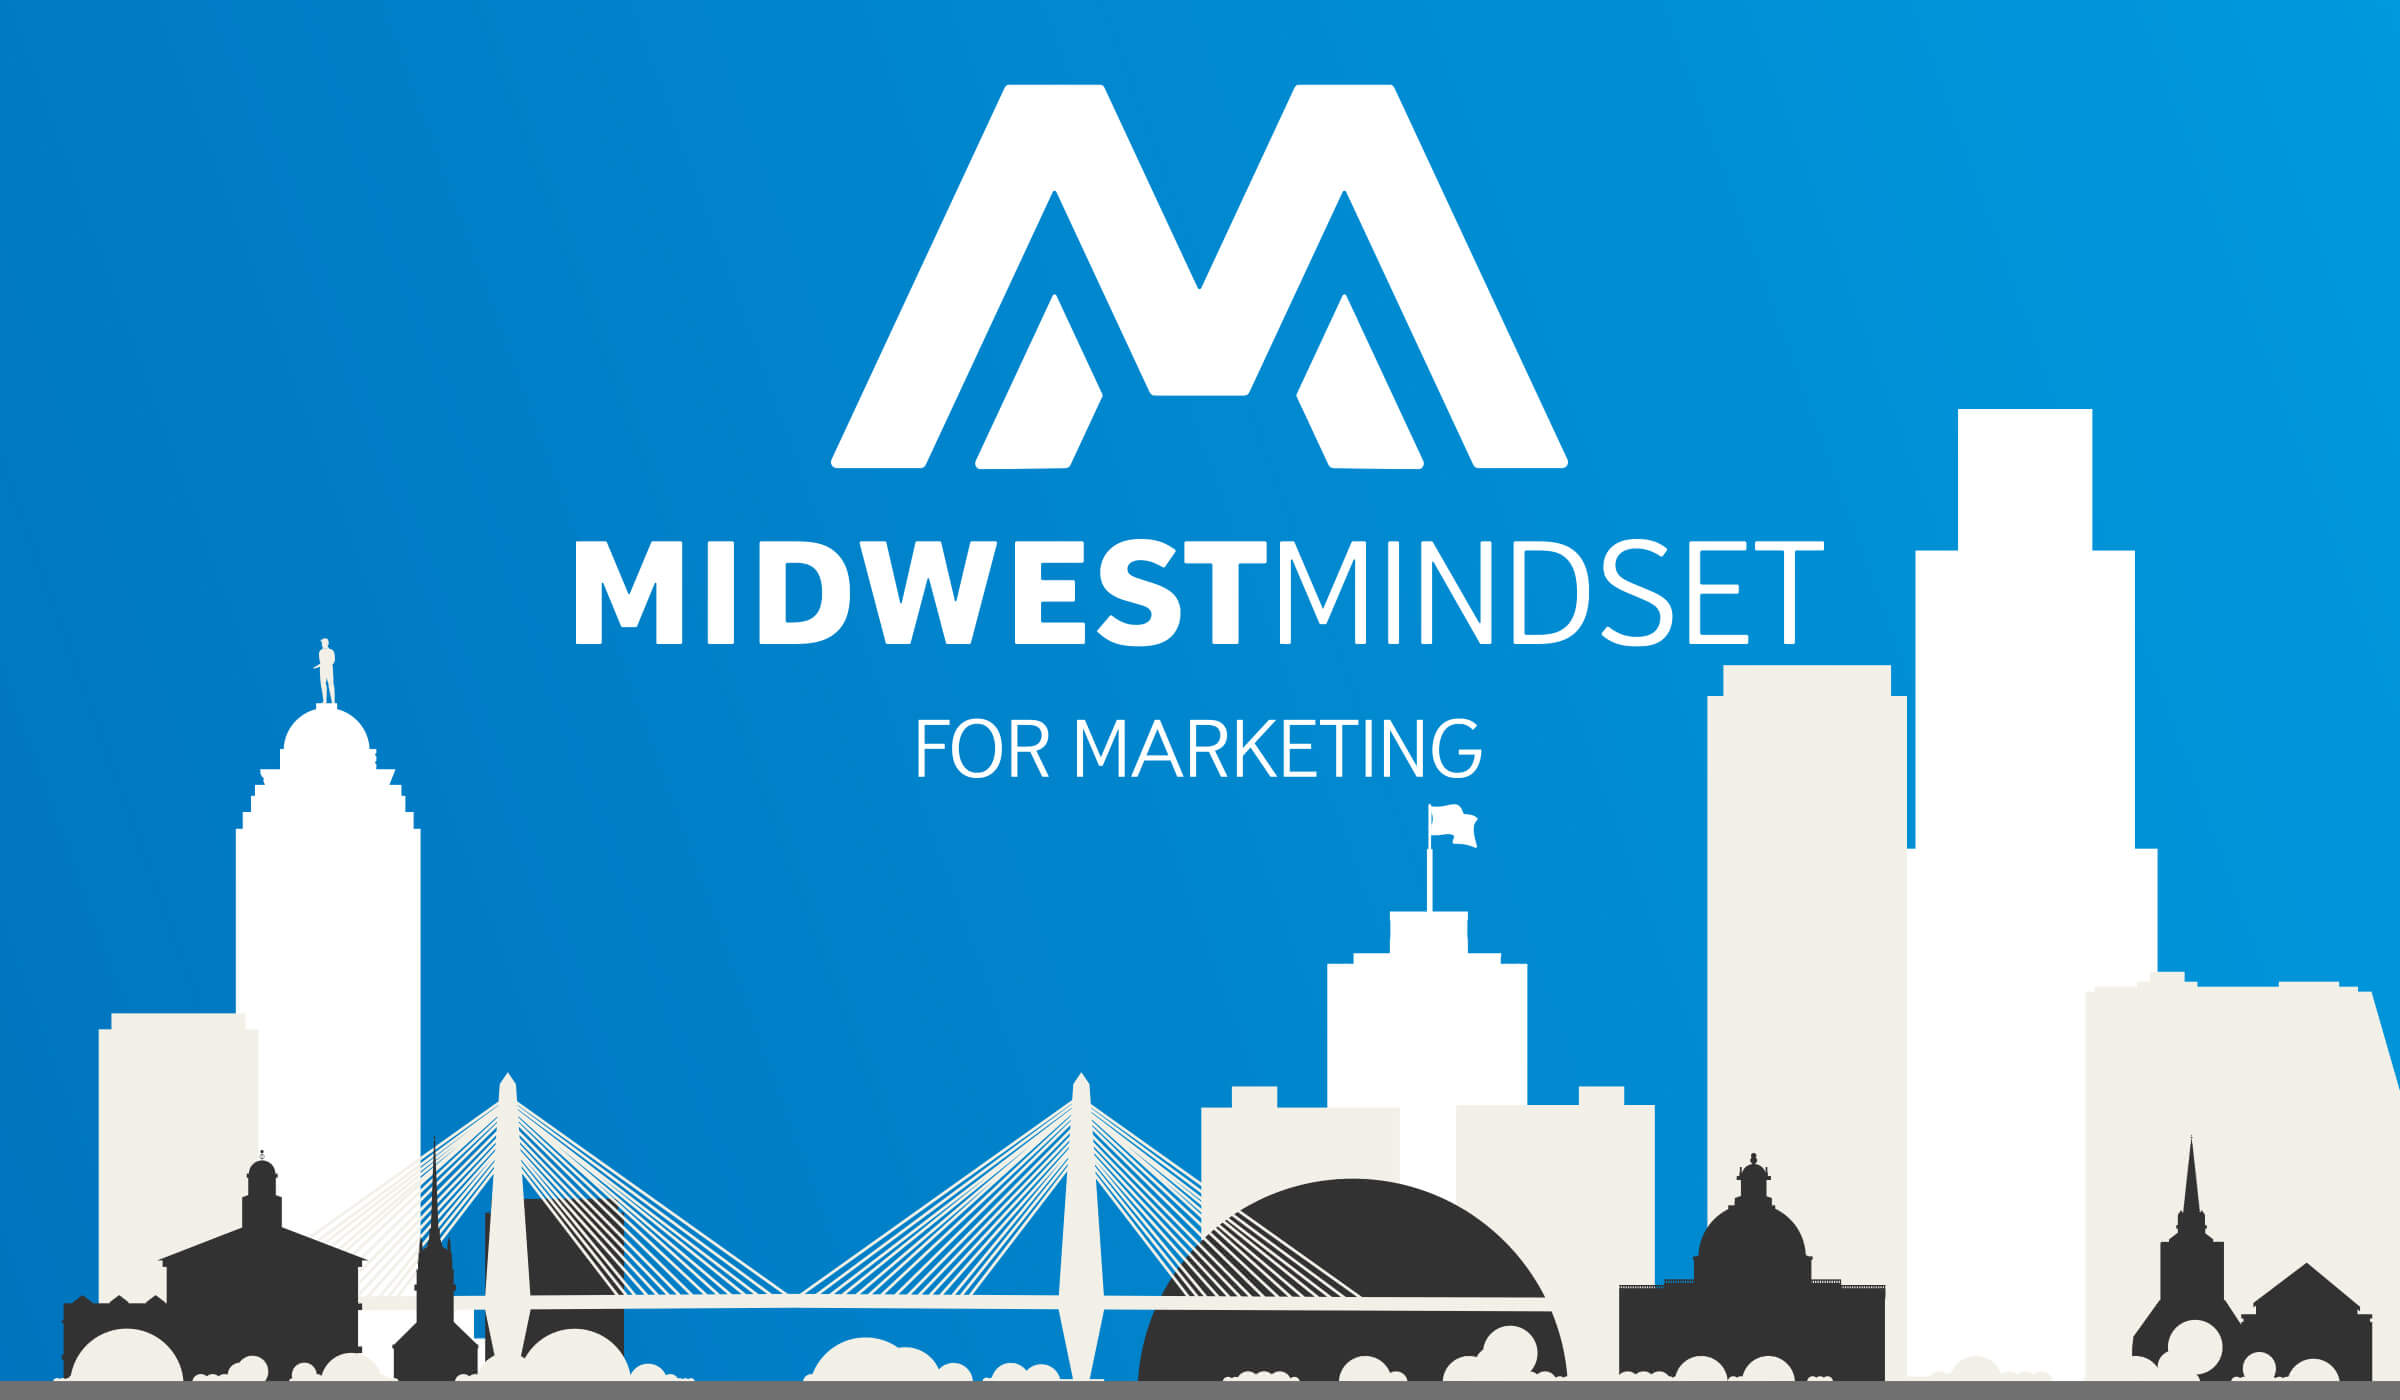 Midwest Mindset for marketing podcast cover art.